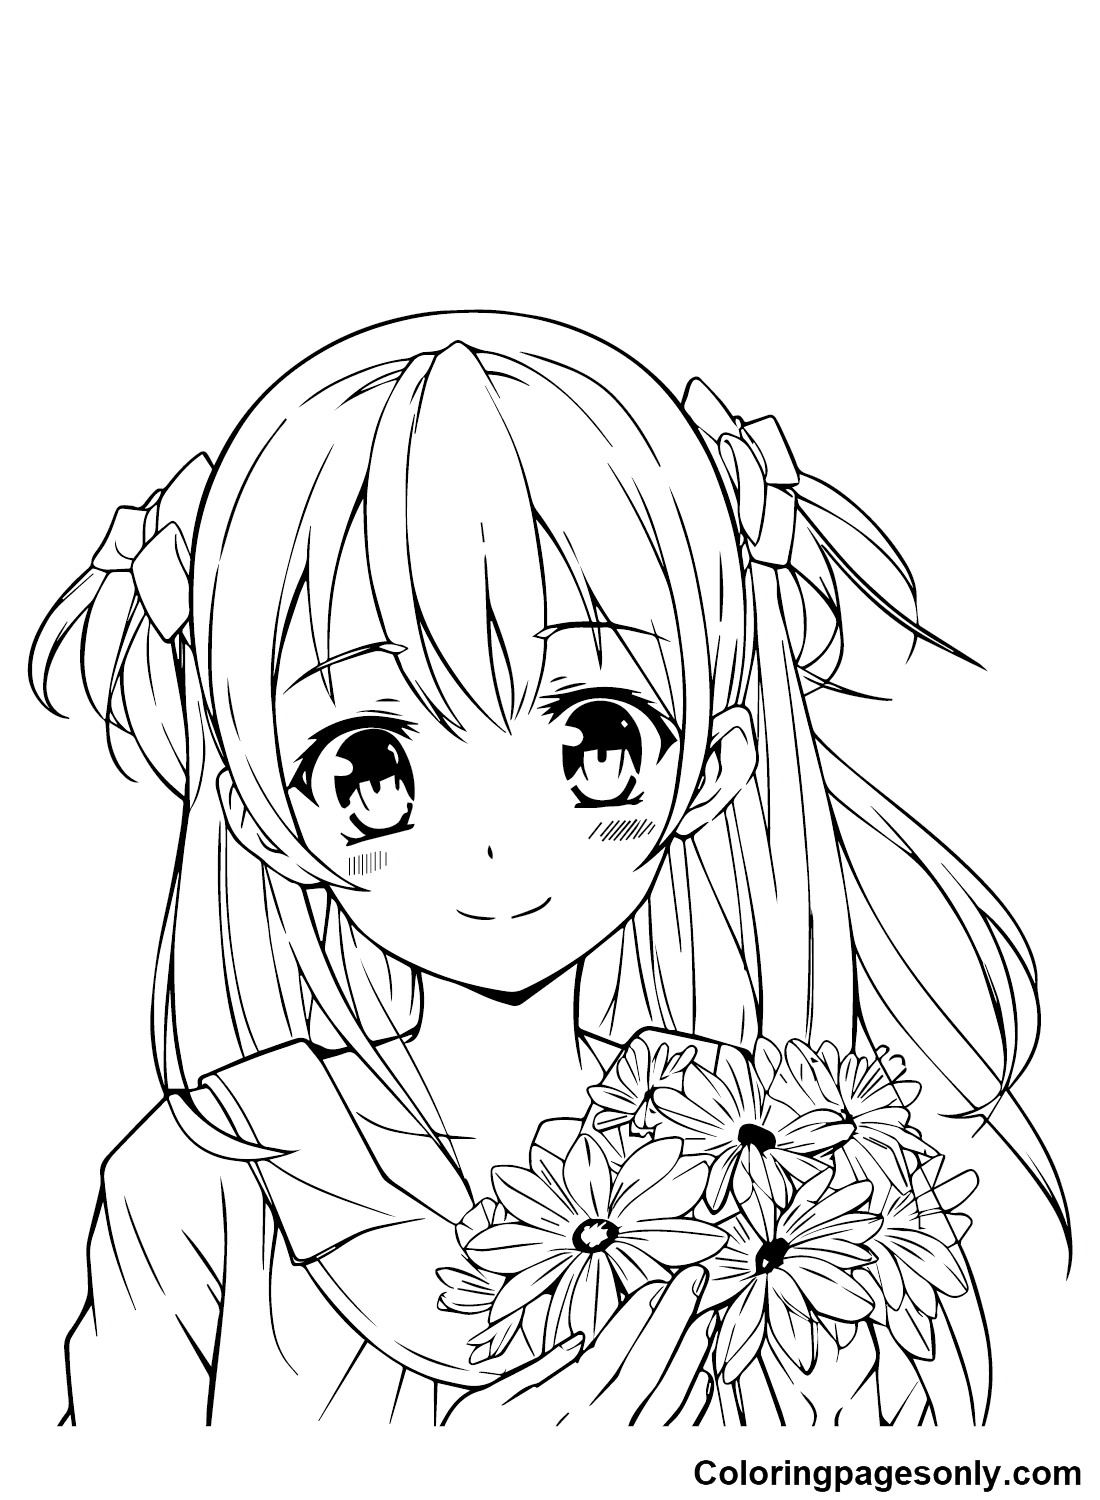 Anime Girl Images Coloring Pages